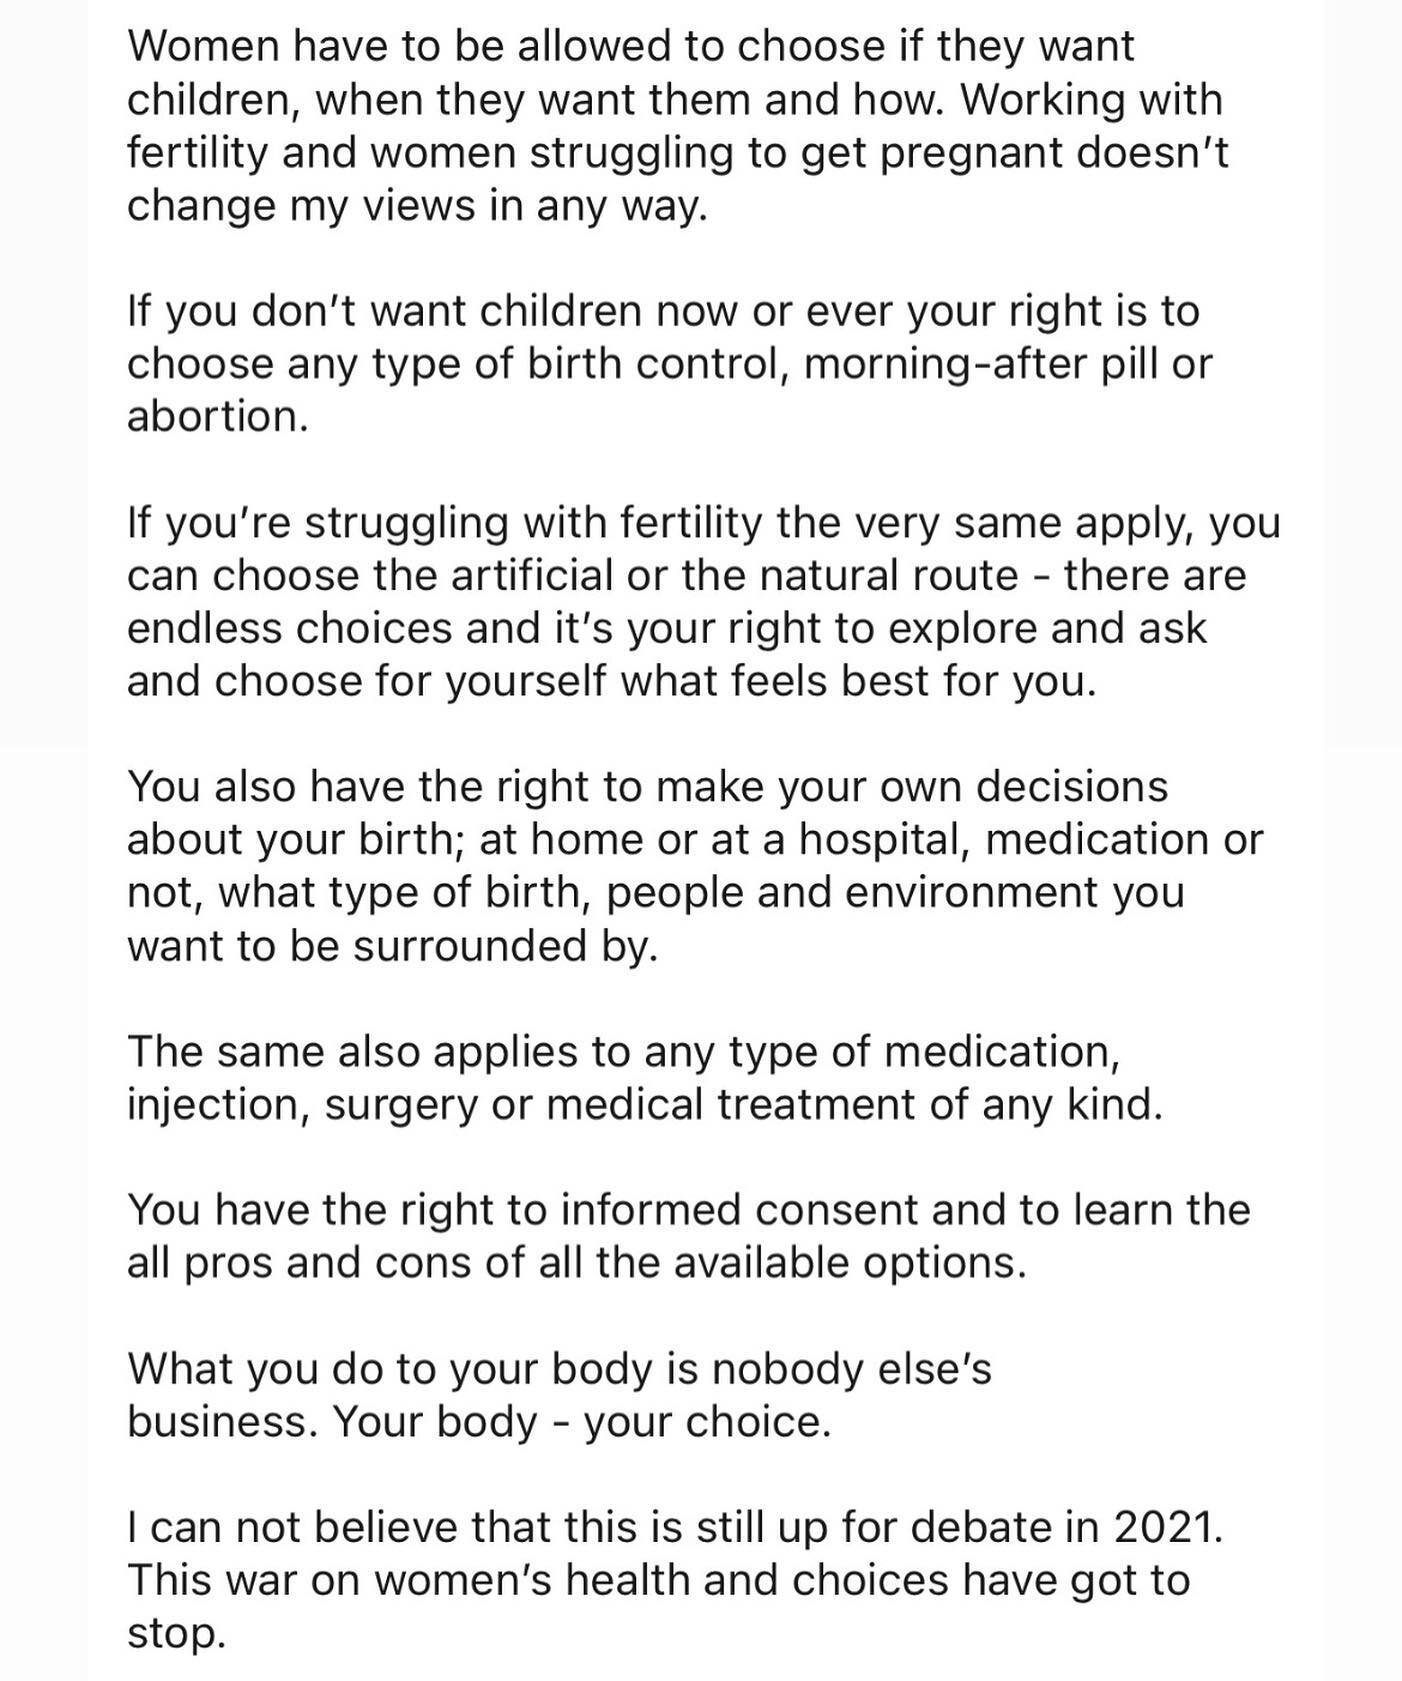 You have the right to choose for yourself which way to go. 

Your body - your choice.